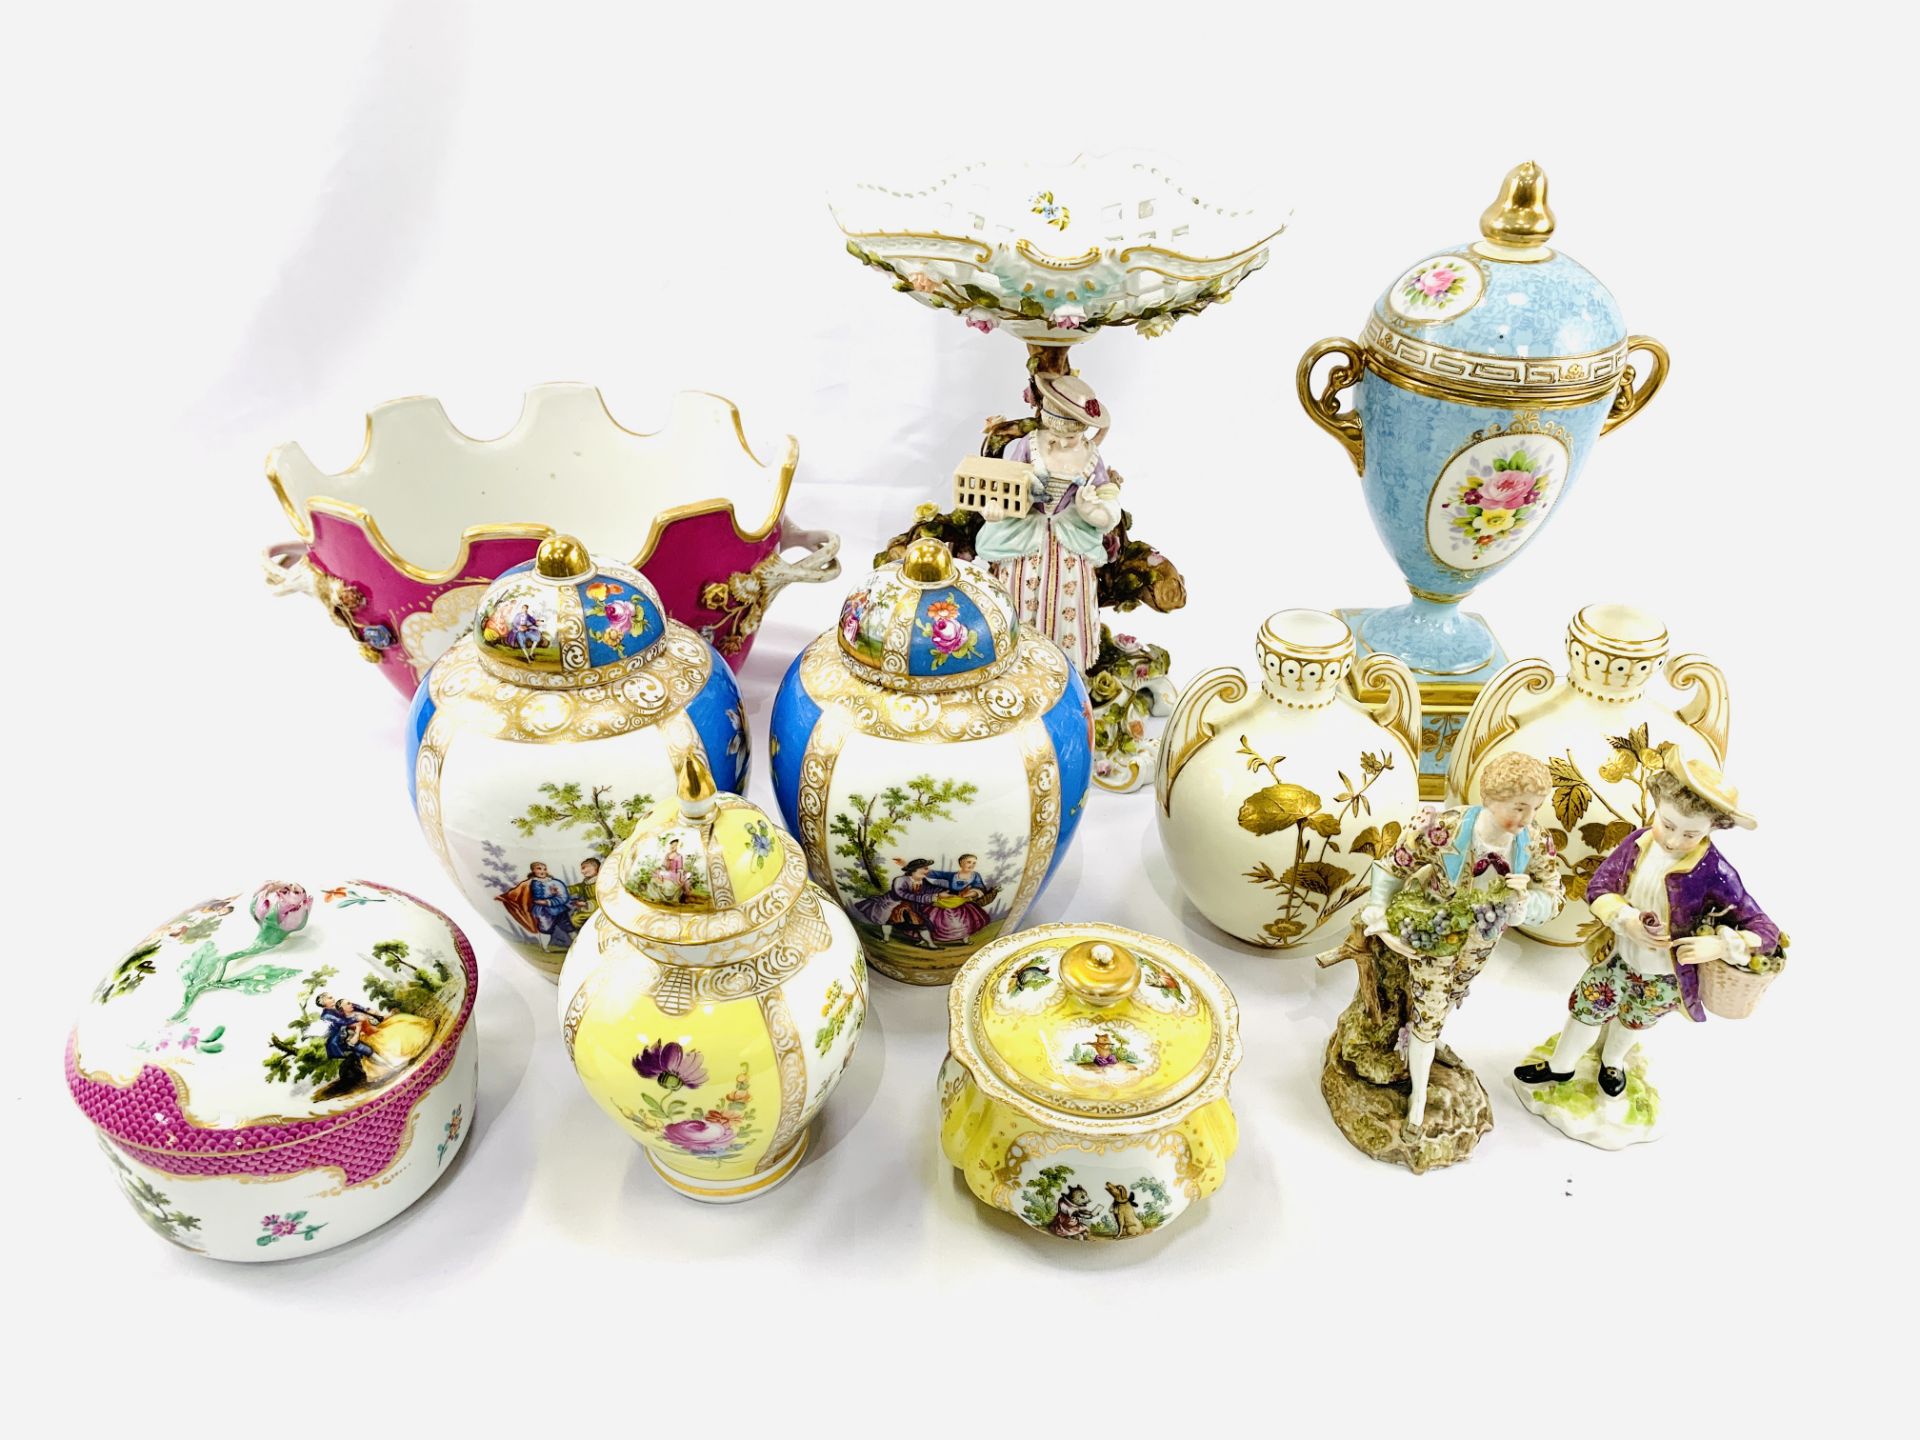 Collection of Dresden and Meissen porcelain